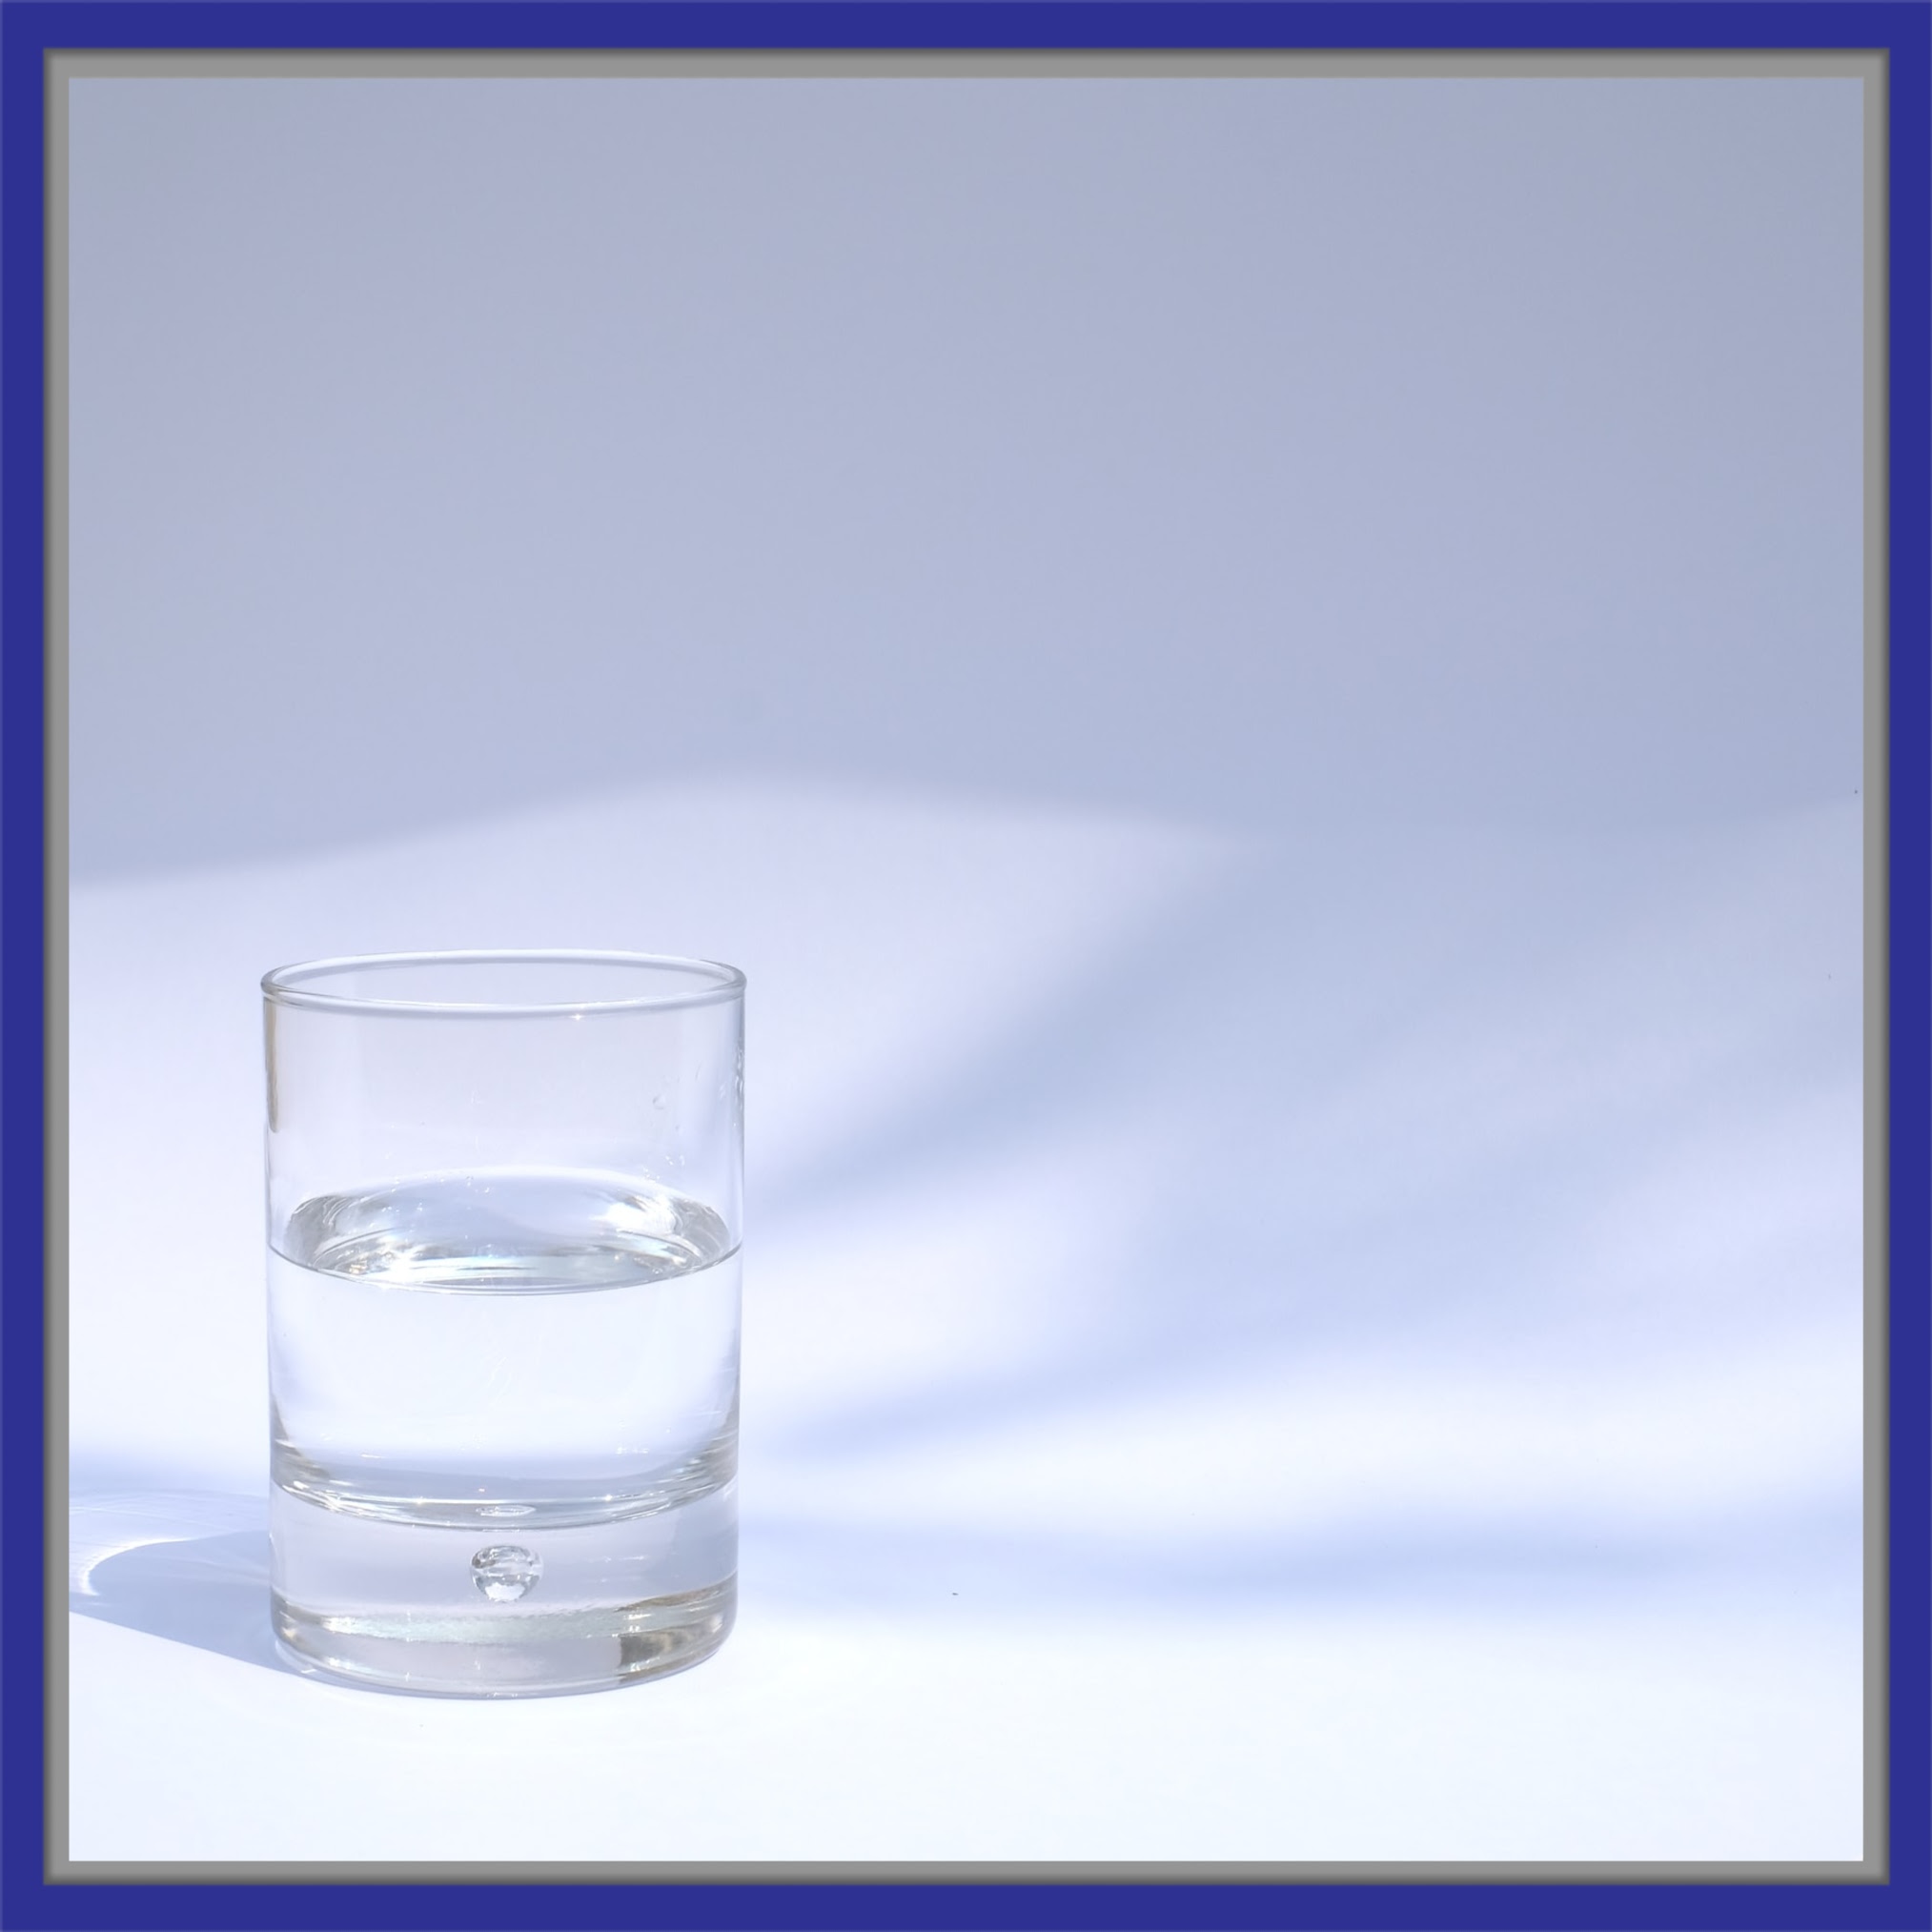 image of a mostly full water glass against a gray blue background